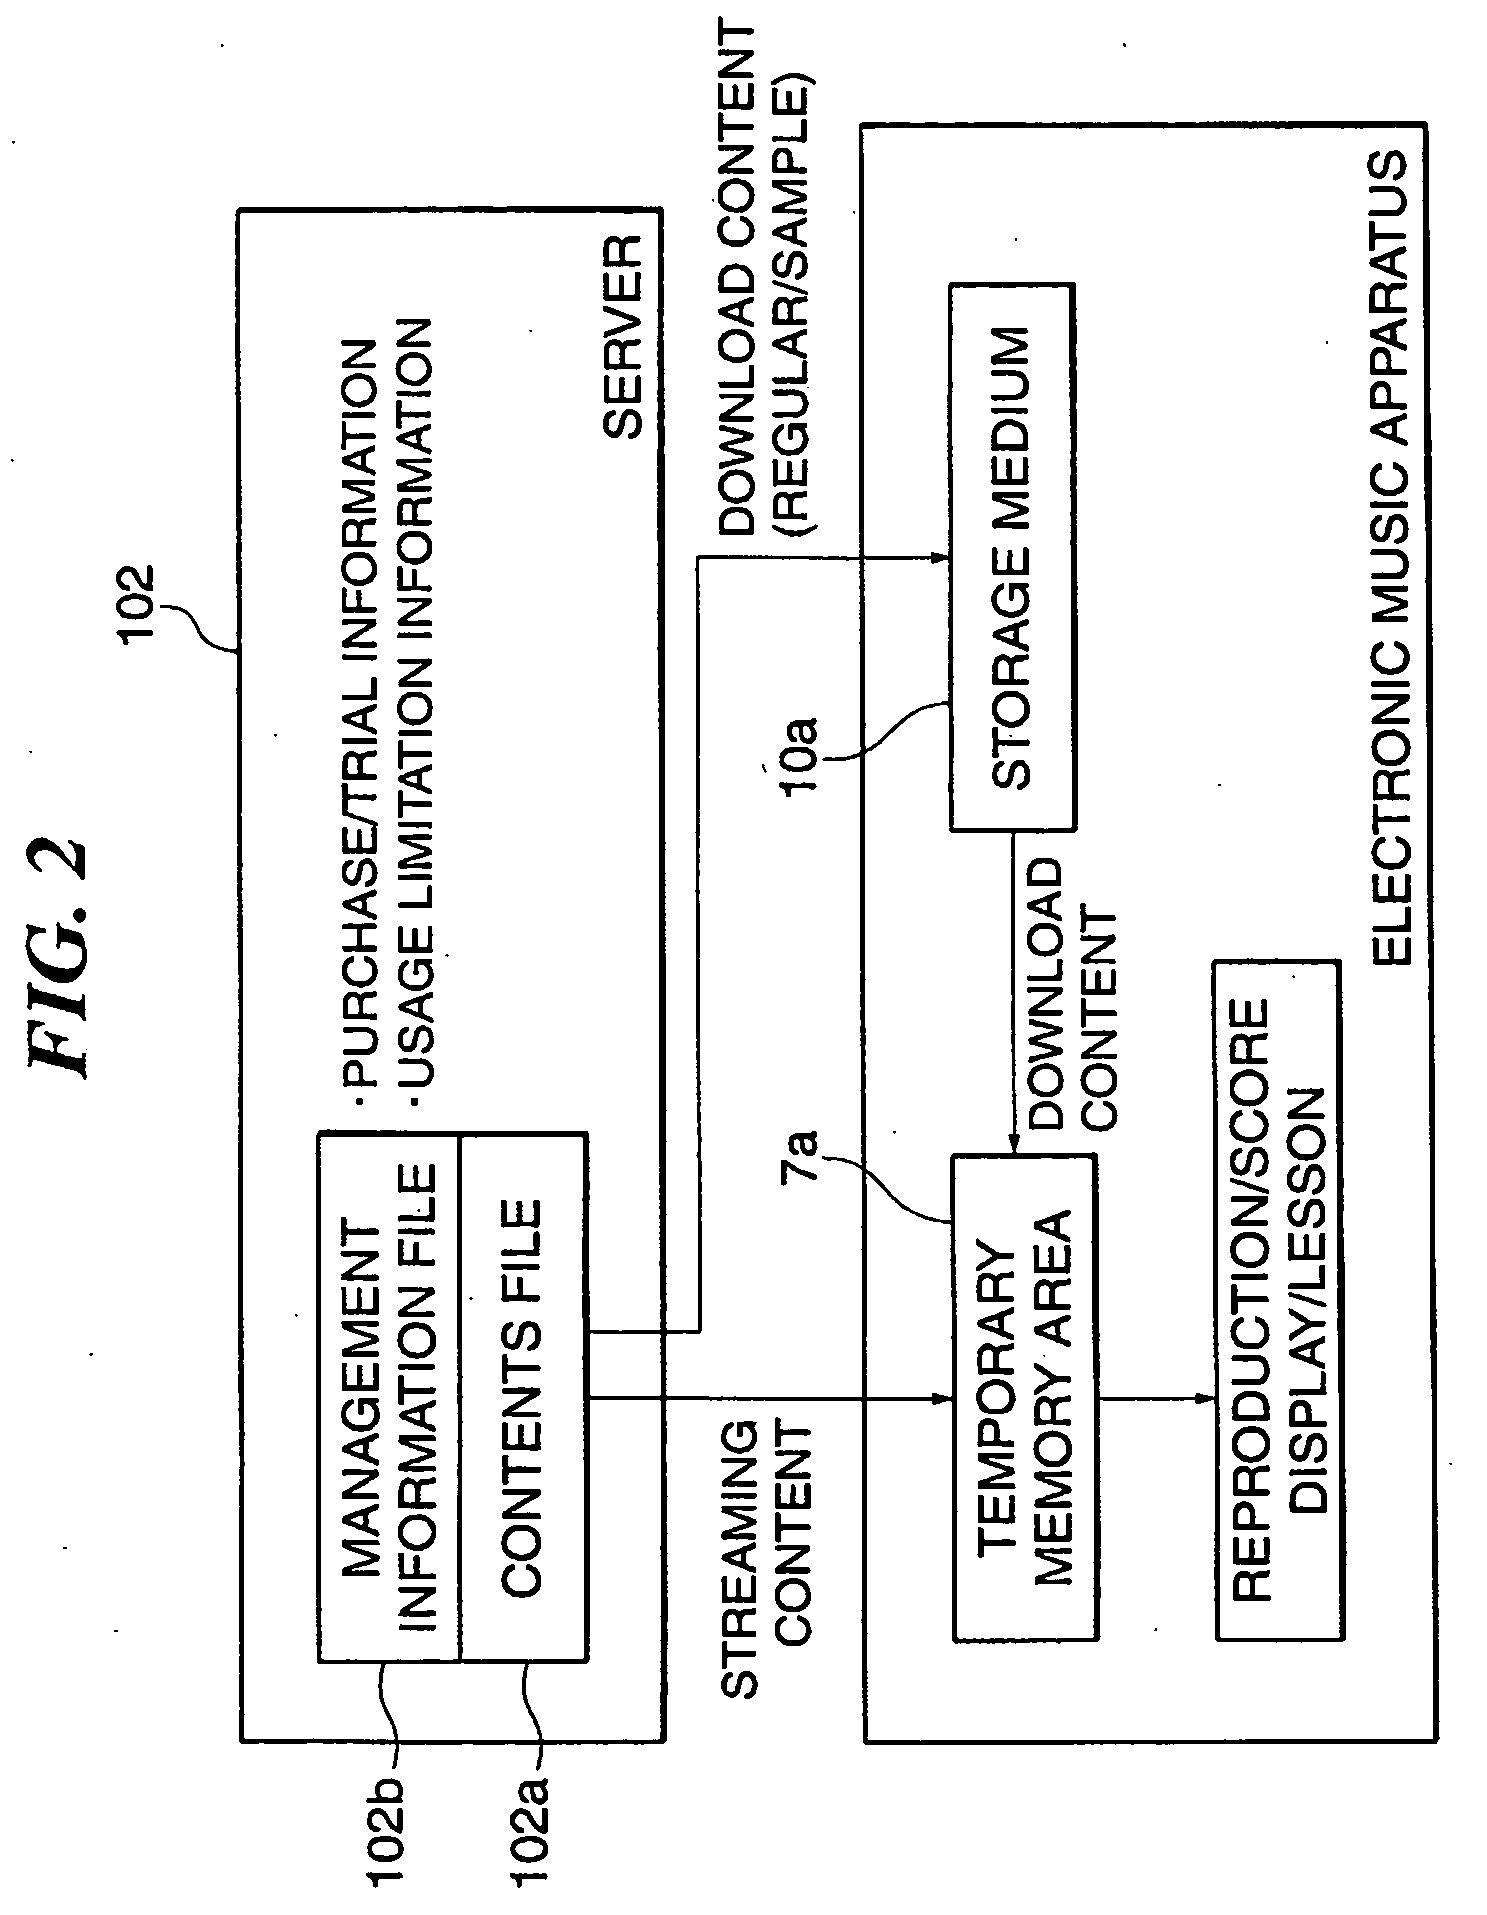 Electronic music apparatus, control method therefor, and program for implementing the control method